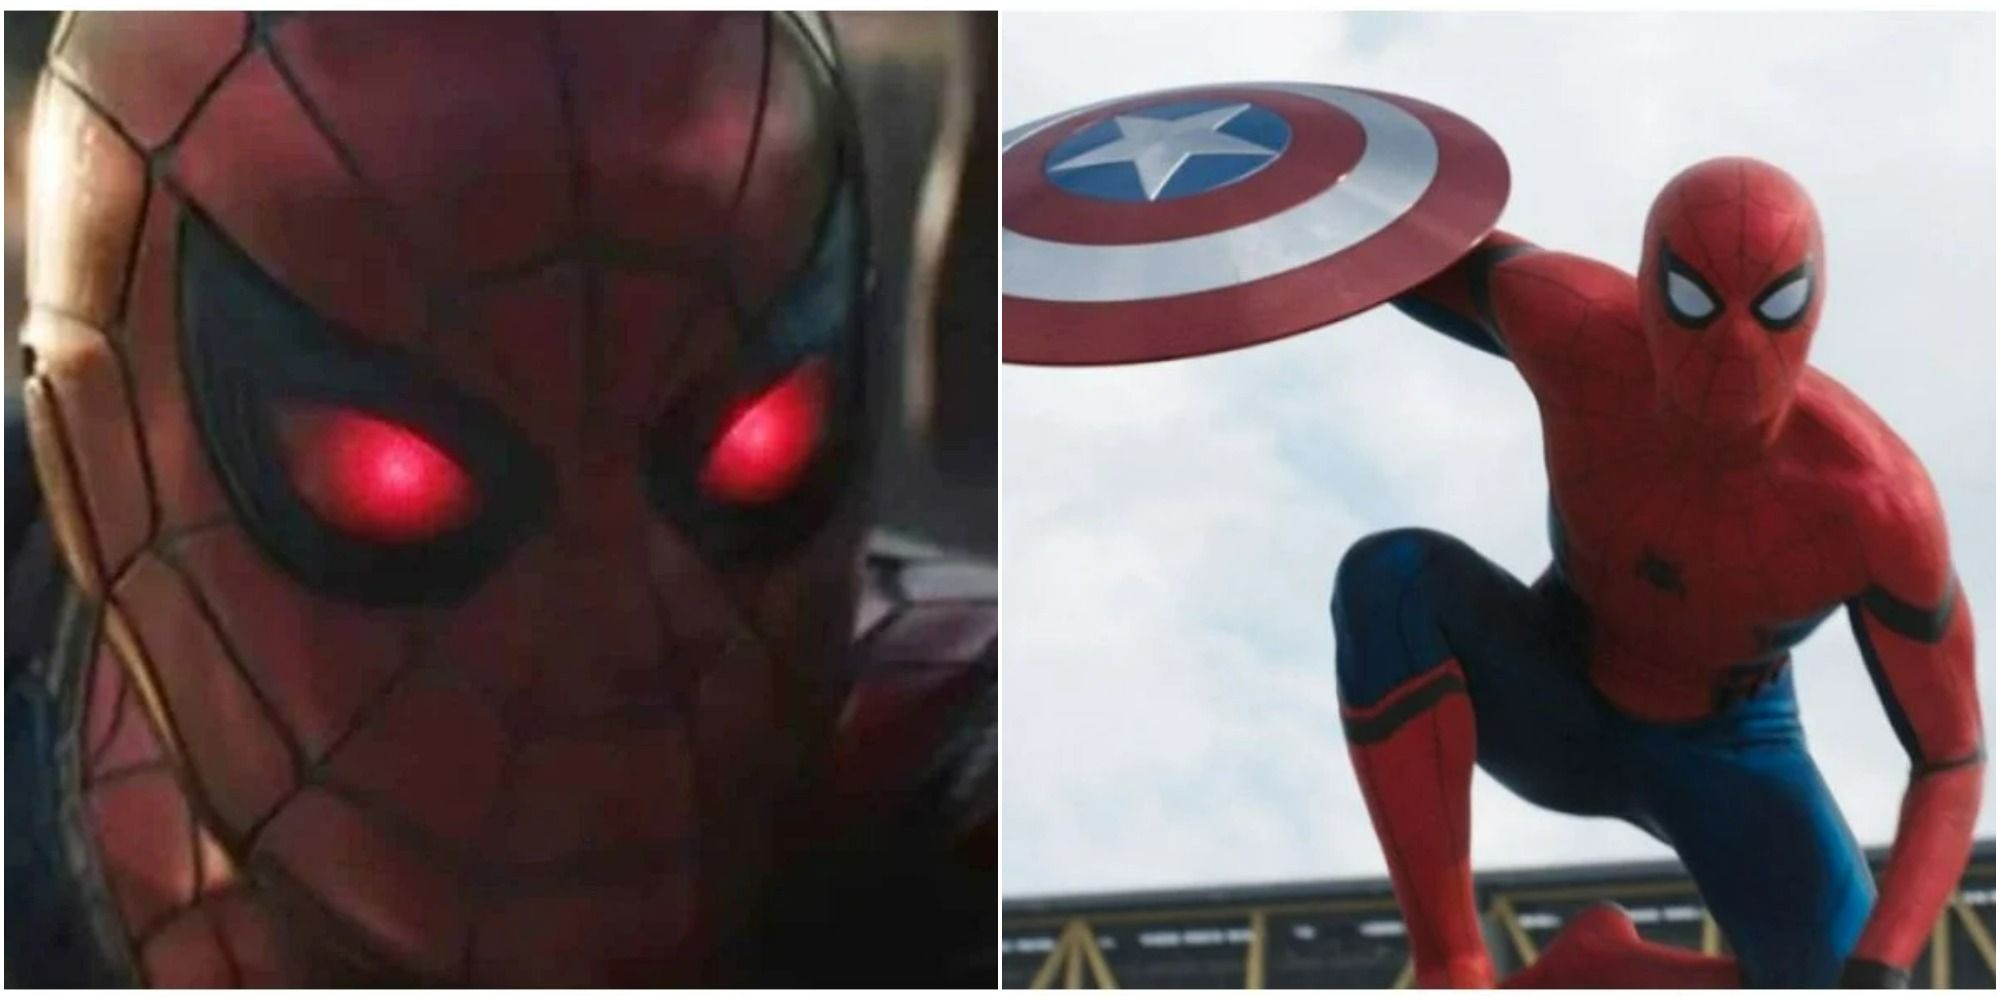 Split Image Of Spider-Man's Instant Kill Mode In Endgame And Spider-Man With Captain America's Shield In Civil War